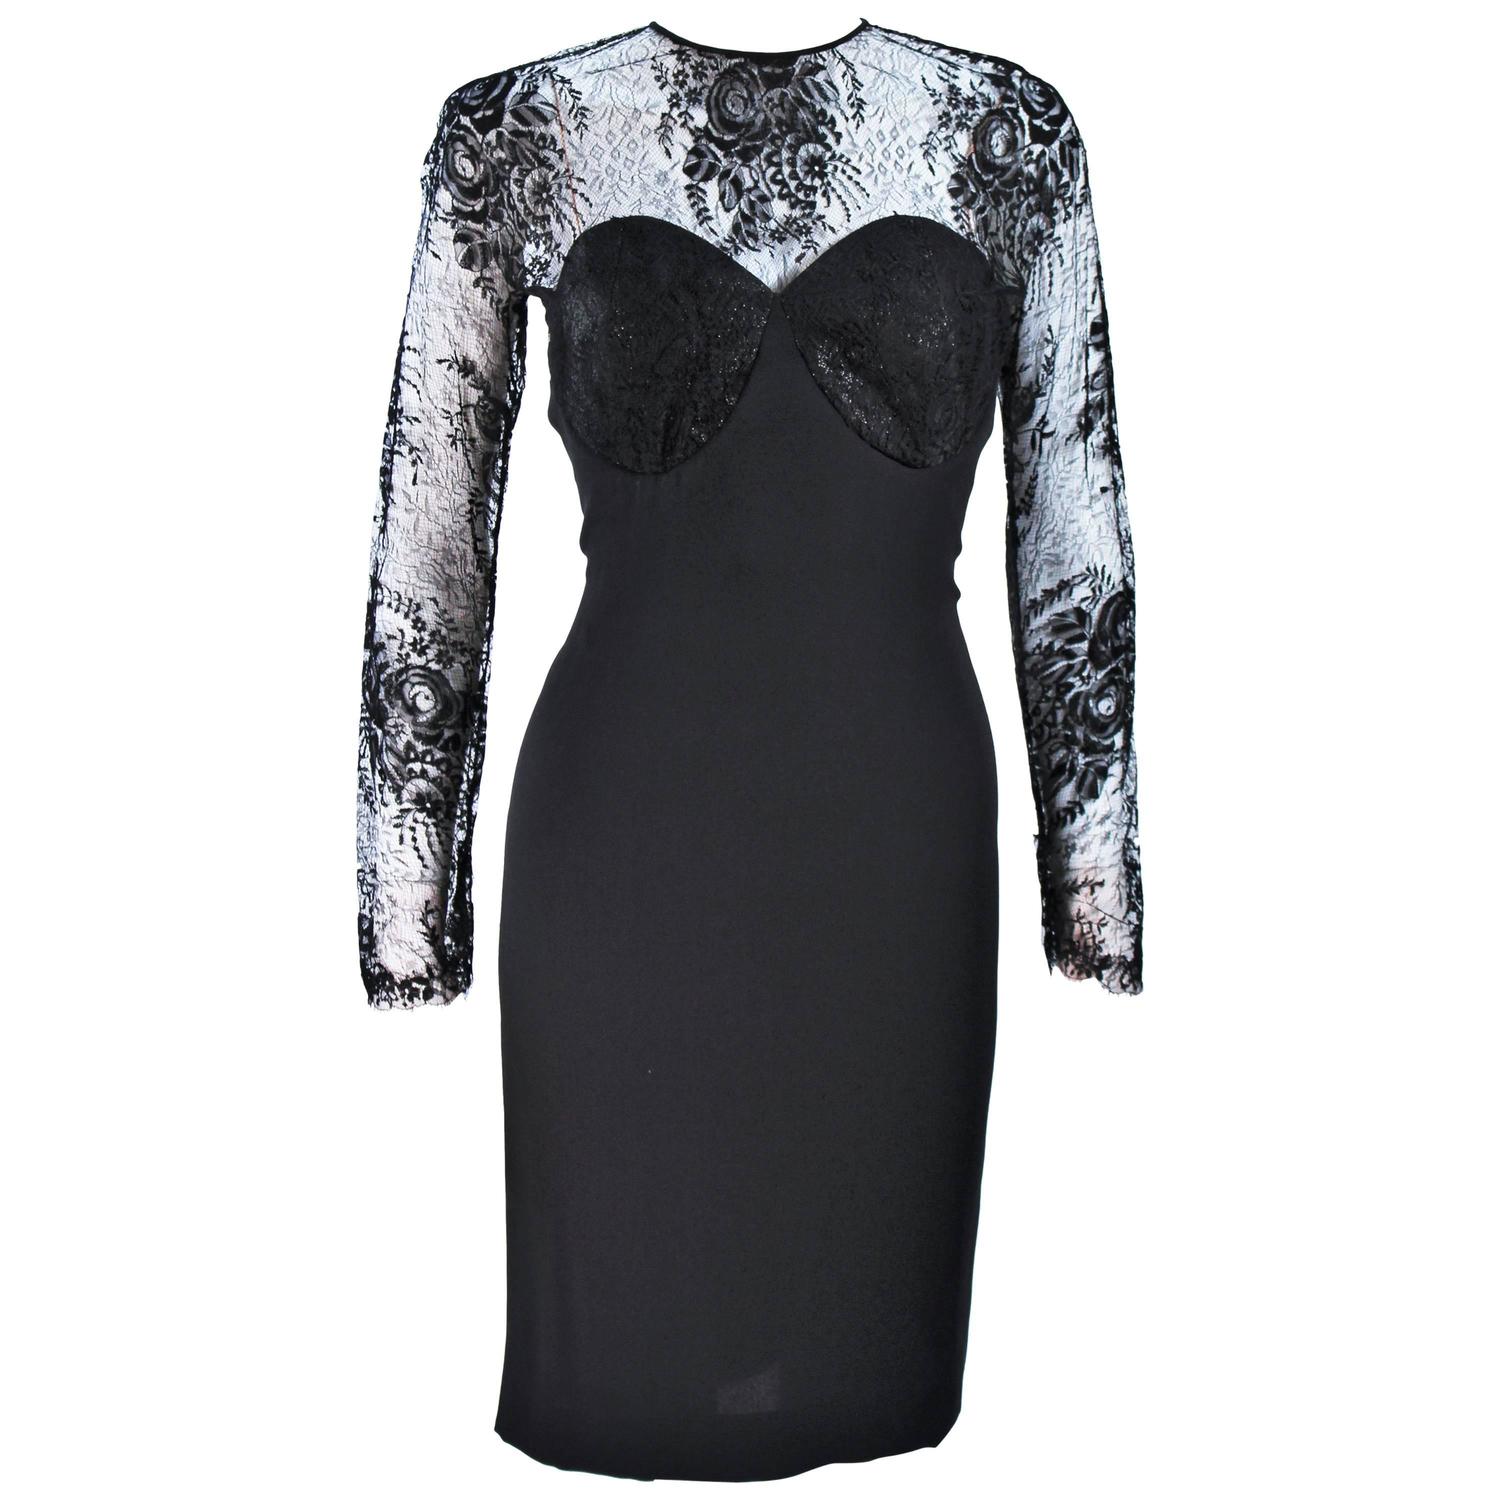 GALANOS Black Lace Cocktail Dress with Metallic Accents Size 8-10 For ...